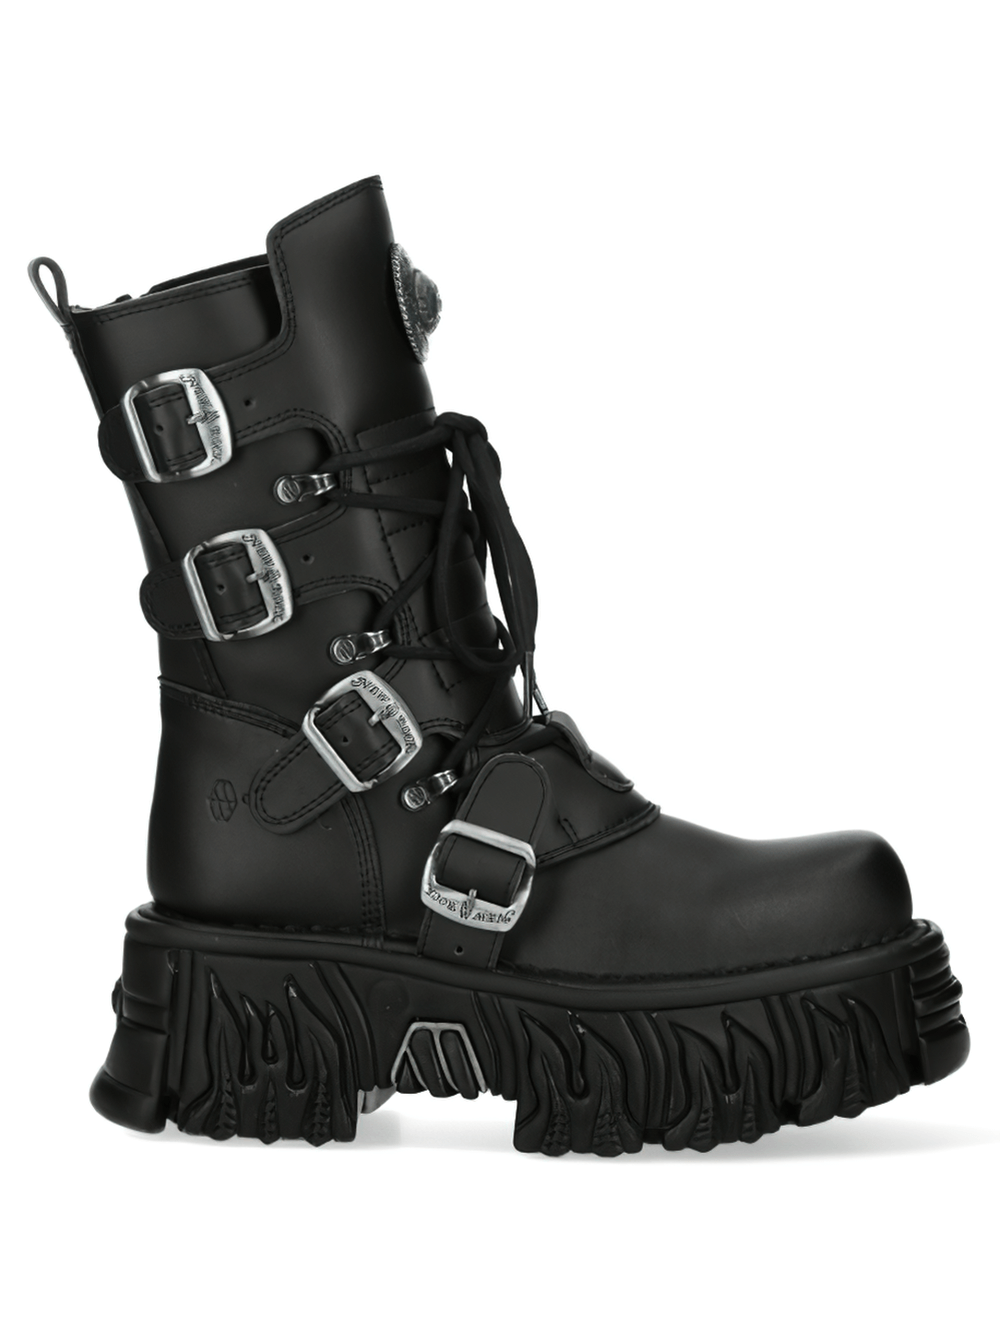 NEW ROCK Gothic Platform Boots with Buckles and Lace-up